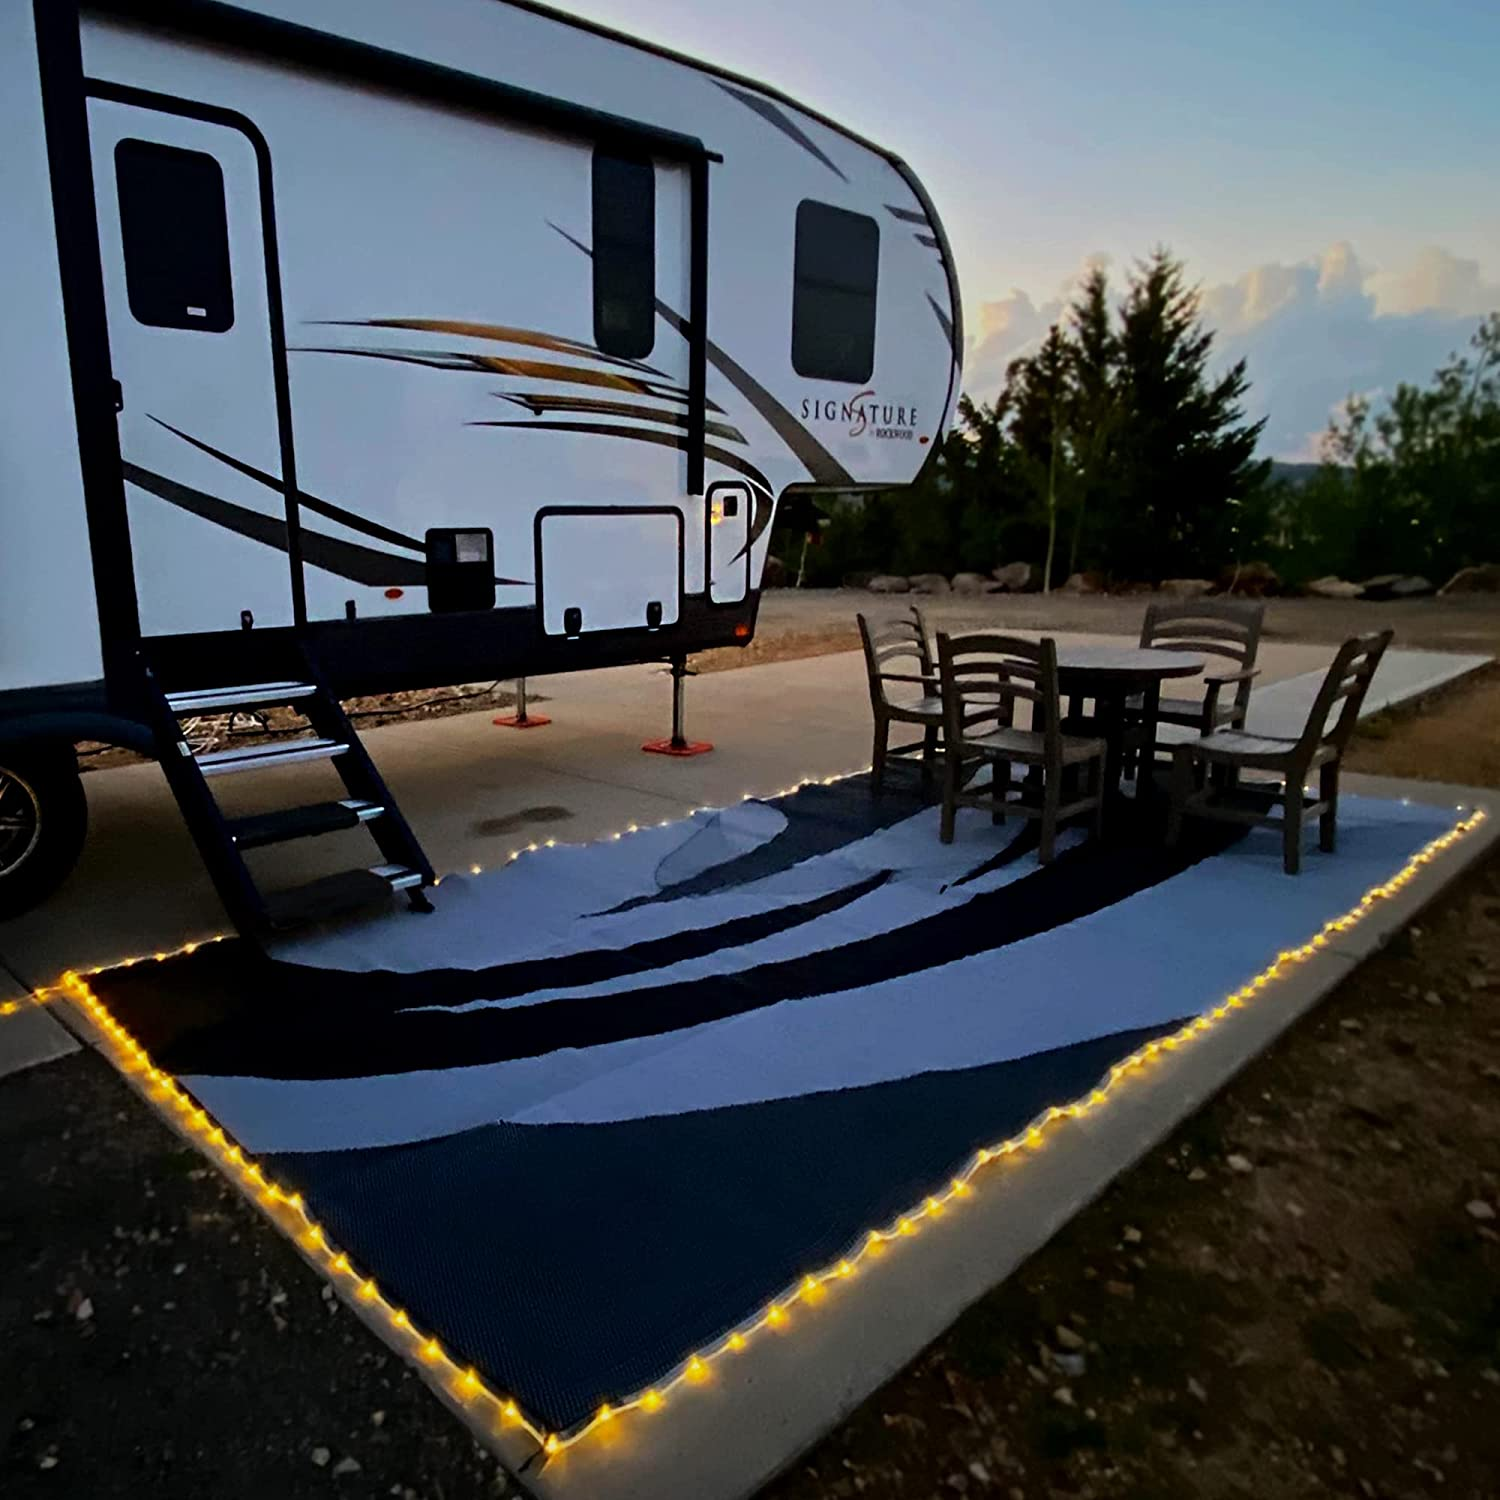 OUTDOOR RV MAT, Product Review